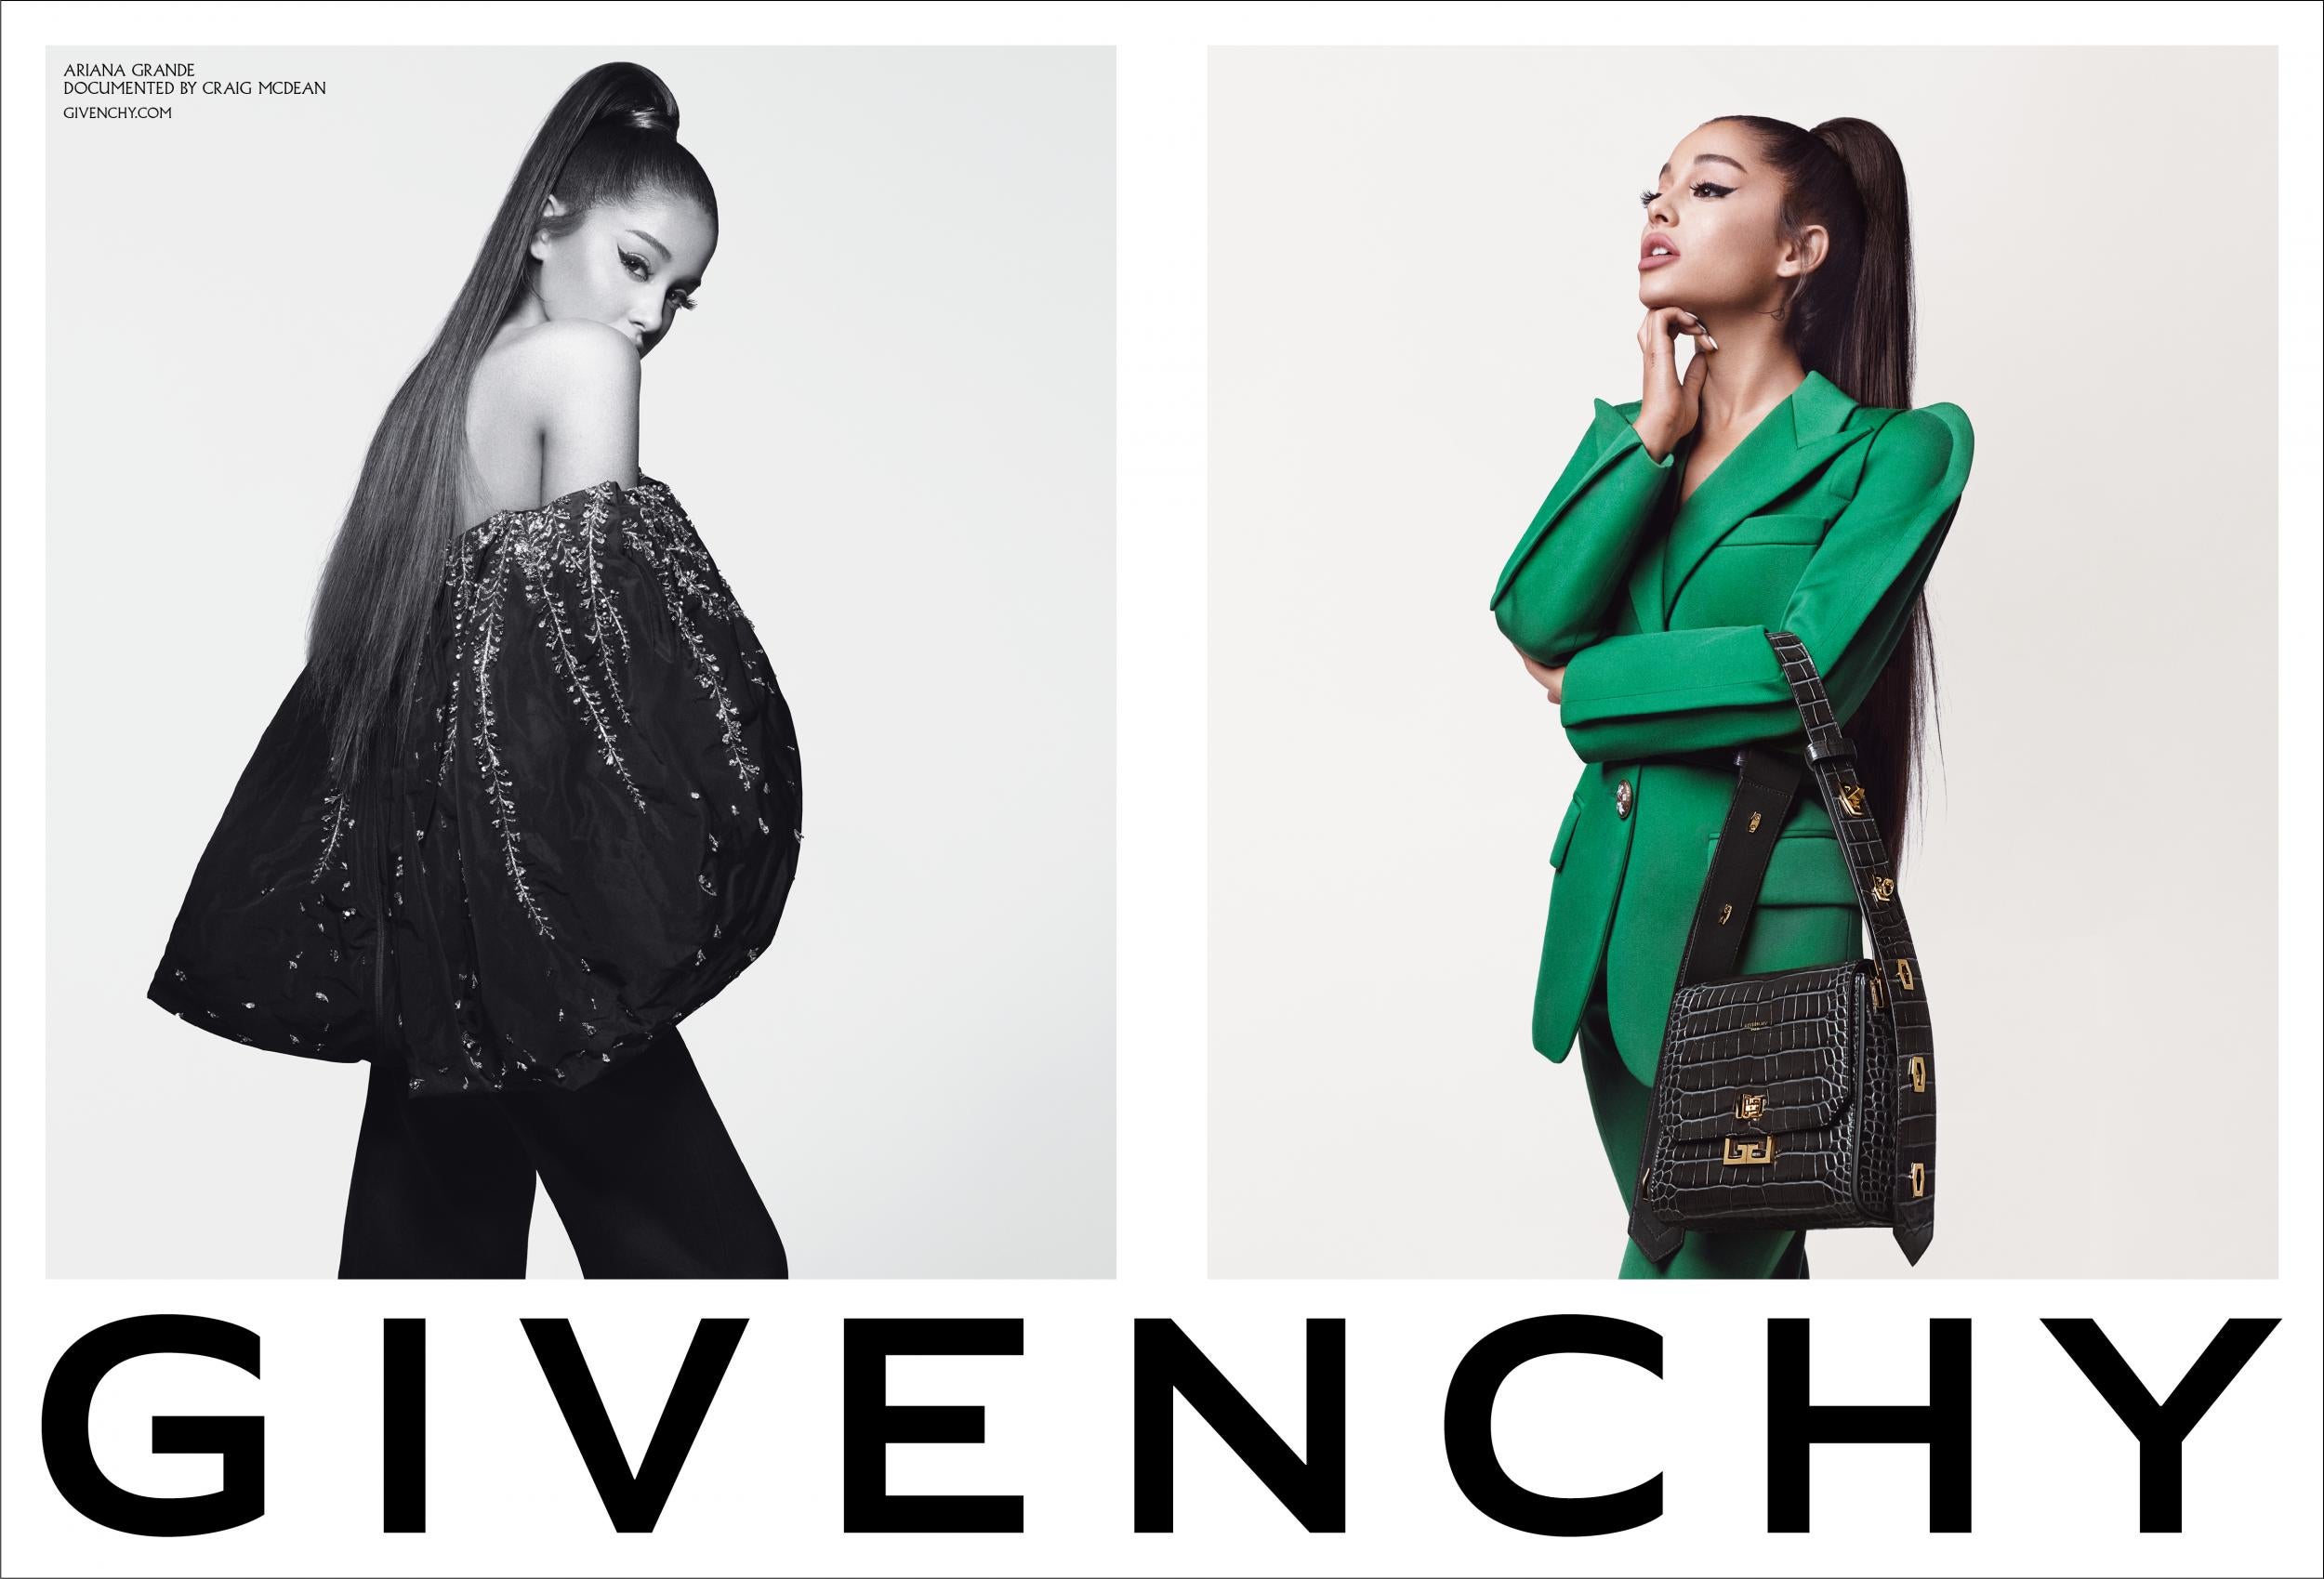 Givenchy's autumn/winter 2019 campaign featuring Ariana Grande